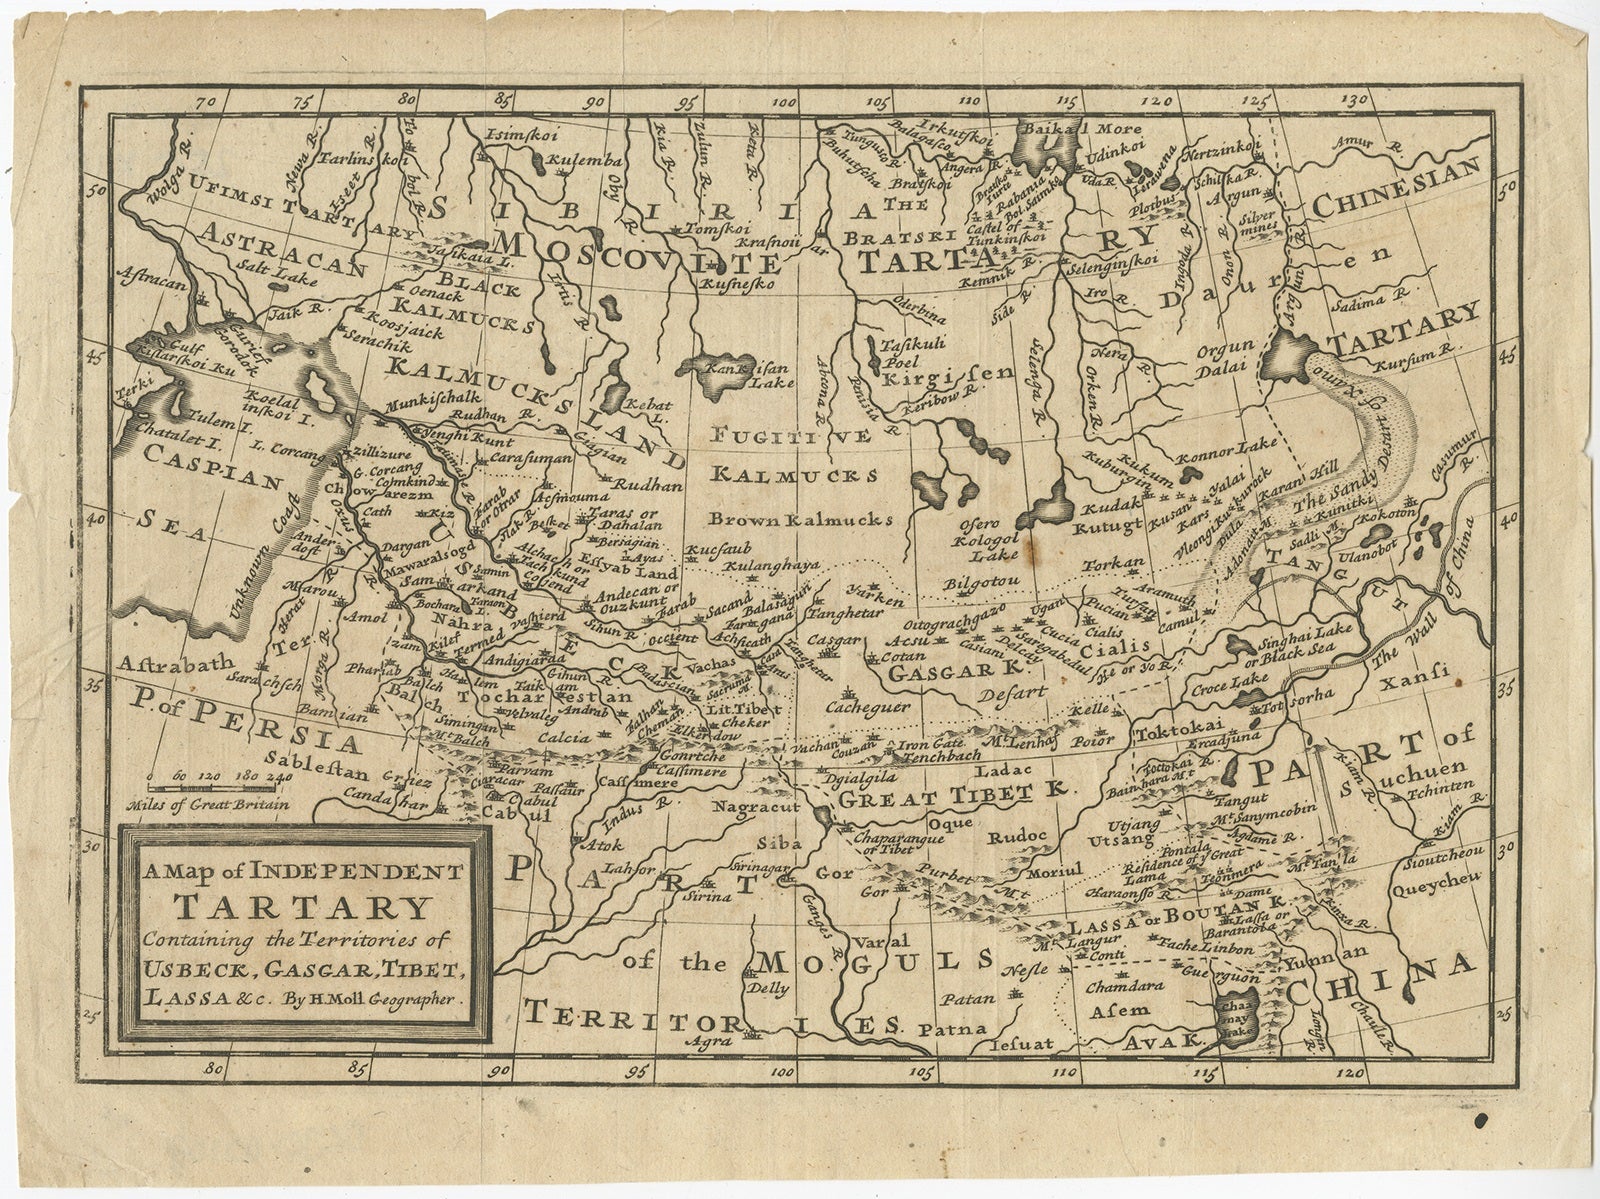 Antique map titled 'A Map of Independent Tartary, containing the territories of Usbeck, Gasgar, Tibet, Lassa & c'.

Old map depicting east of the Caspian Sea with parts of Persia, Siberia, the Mogul territories and on to western China. This map